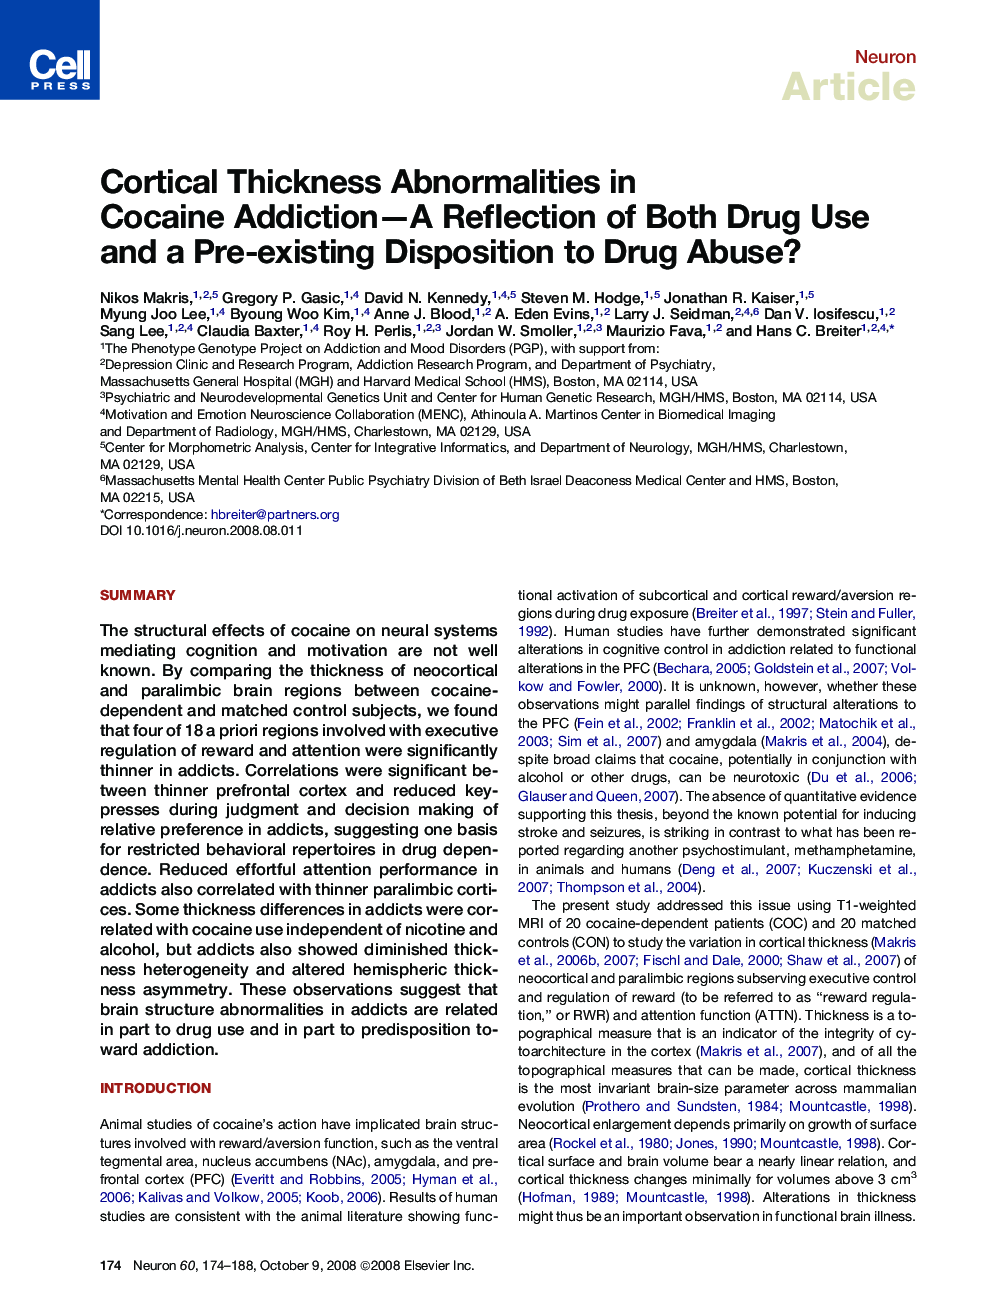 Cortical Thickness Abnormalities in Cocaine Addiction—A Reflection of Both Drug Use and a Pre-existing Disposition to Drug Abuse?